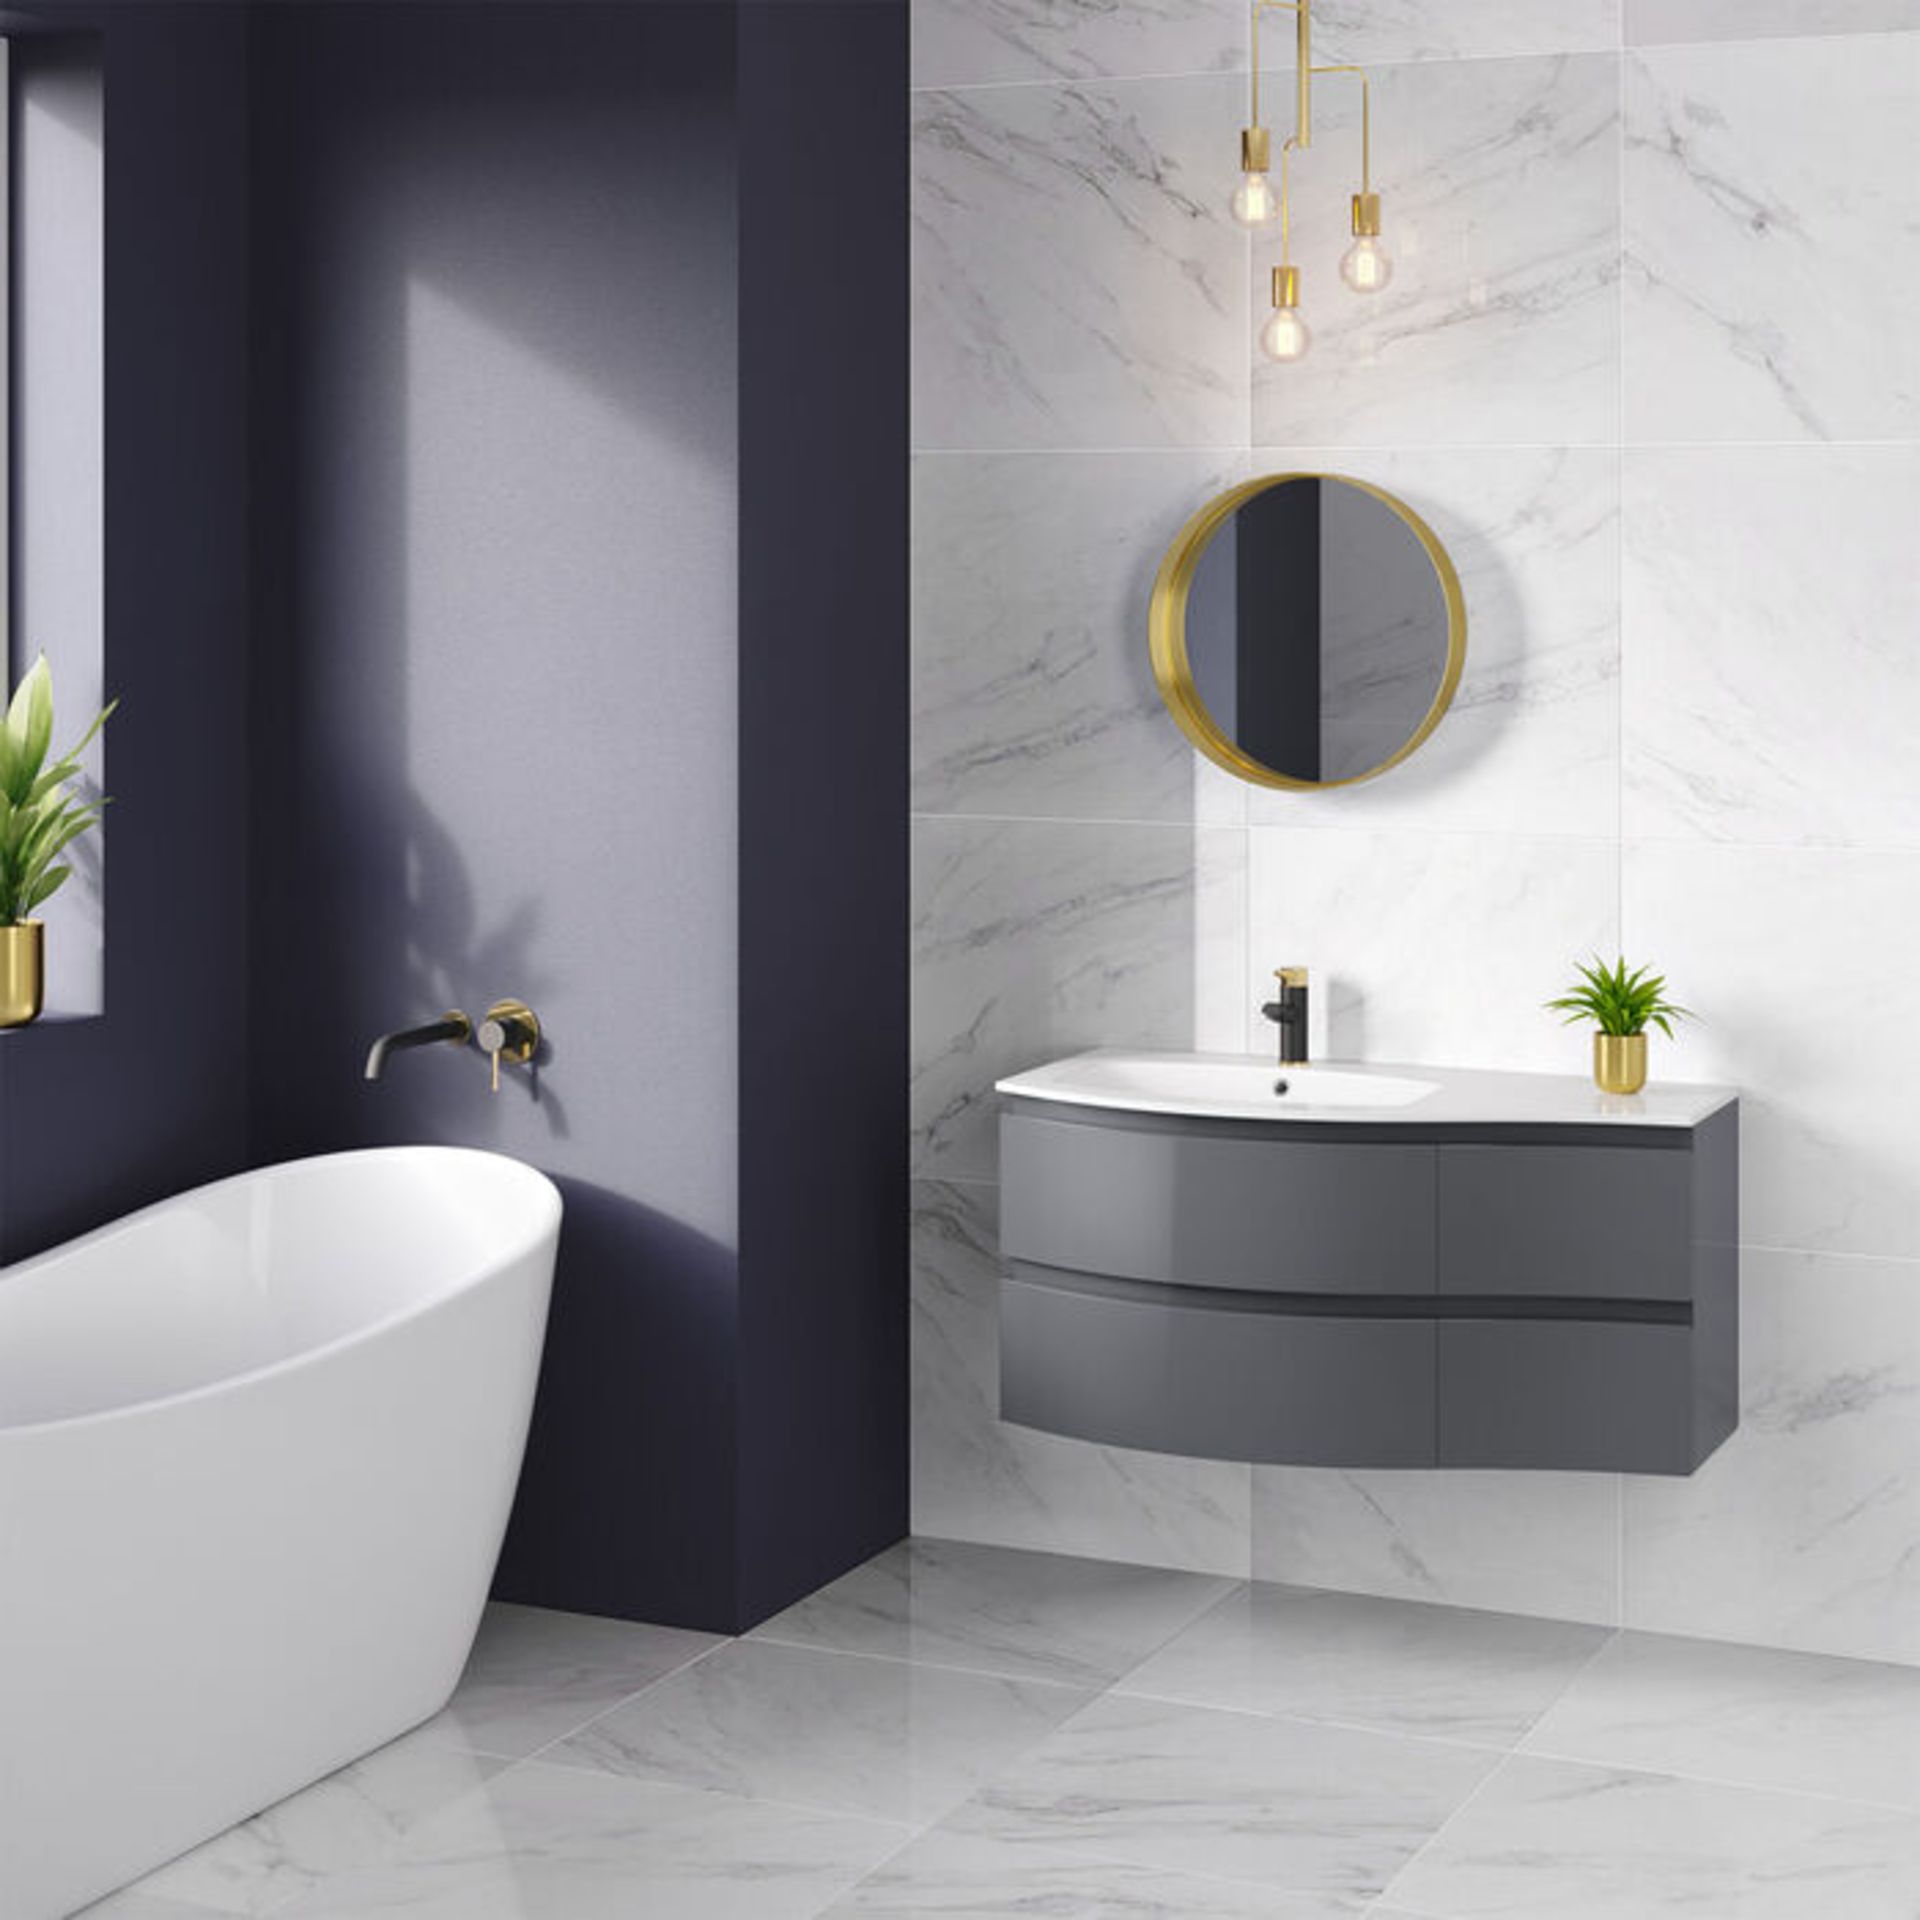 NEW & BOXED 1040mm Amelie Gloss Grey Curved Vanity Unit - Left Hand - Wall Hung. RRP £1,199. ... - Image 3 of 3